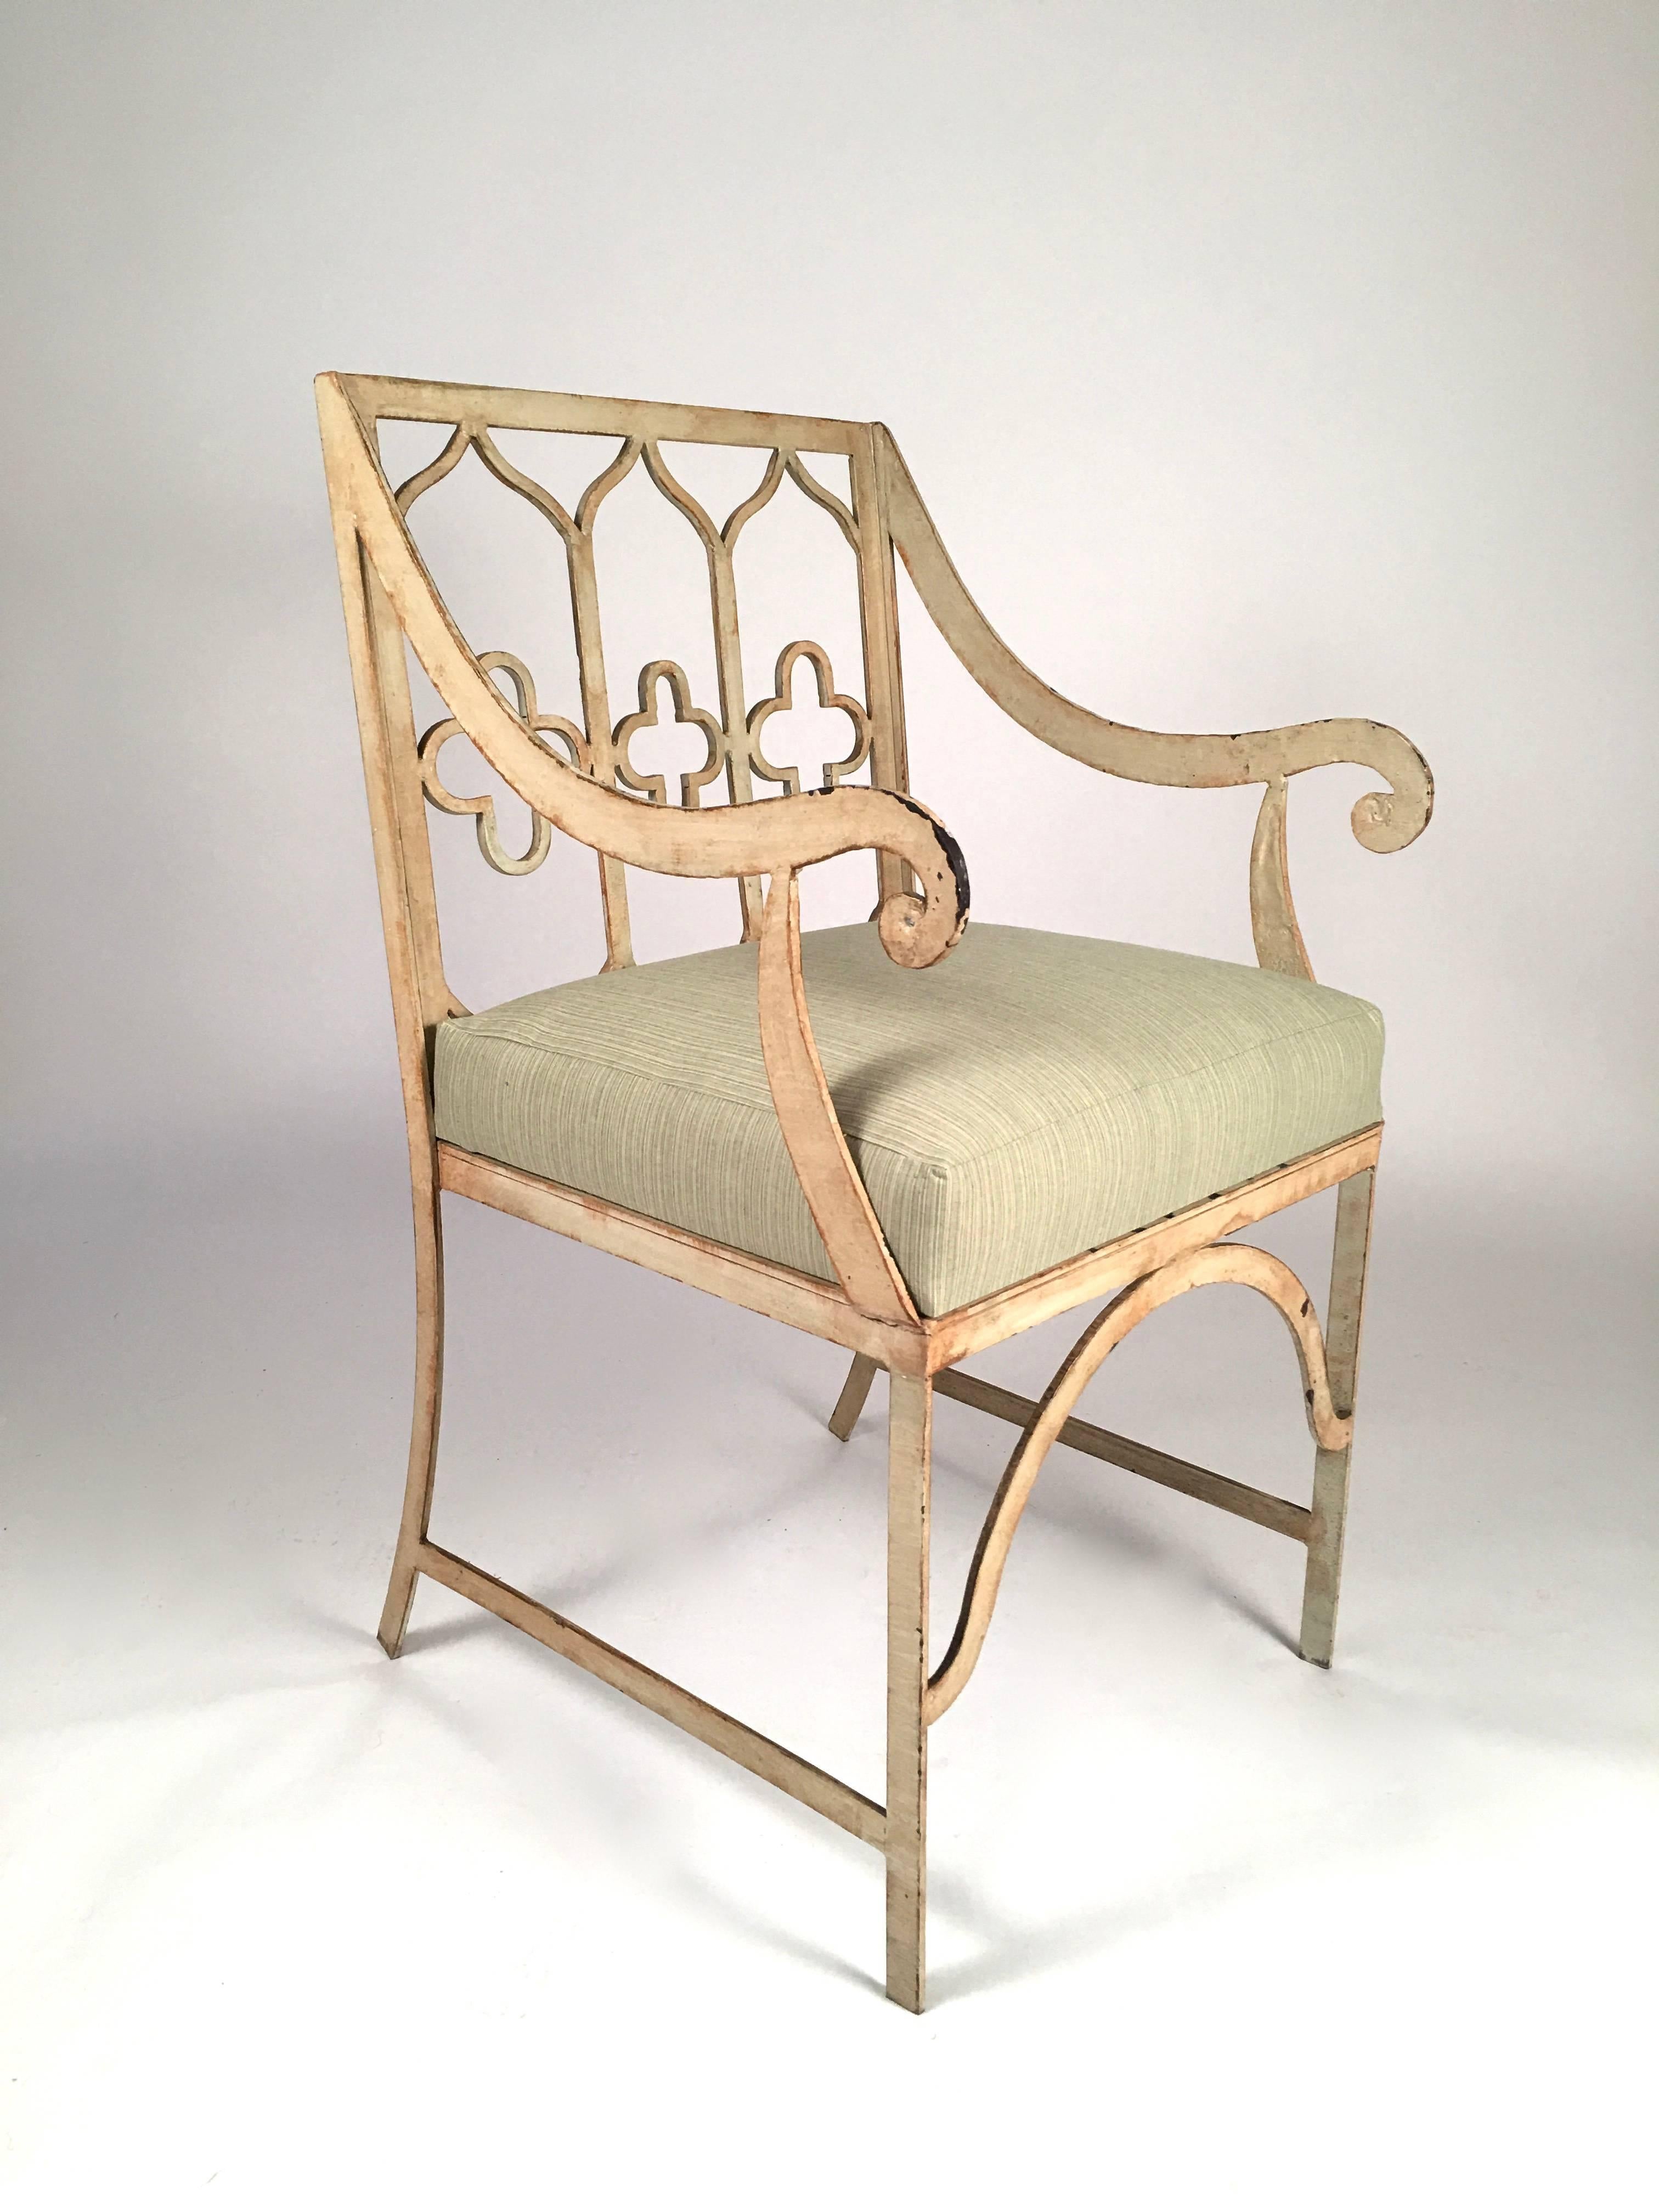 A Gothic Revival garden chair in painted iron, the quake back decorated with gothic tracery and quatrefoils flanked by two down swept scrolling arms over a square, newly upholstered seat with cushion, supported on four legs joined by cross